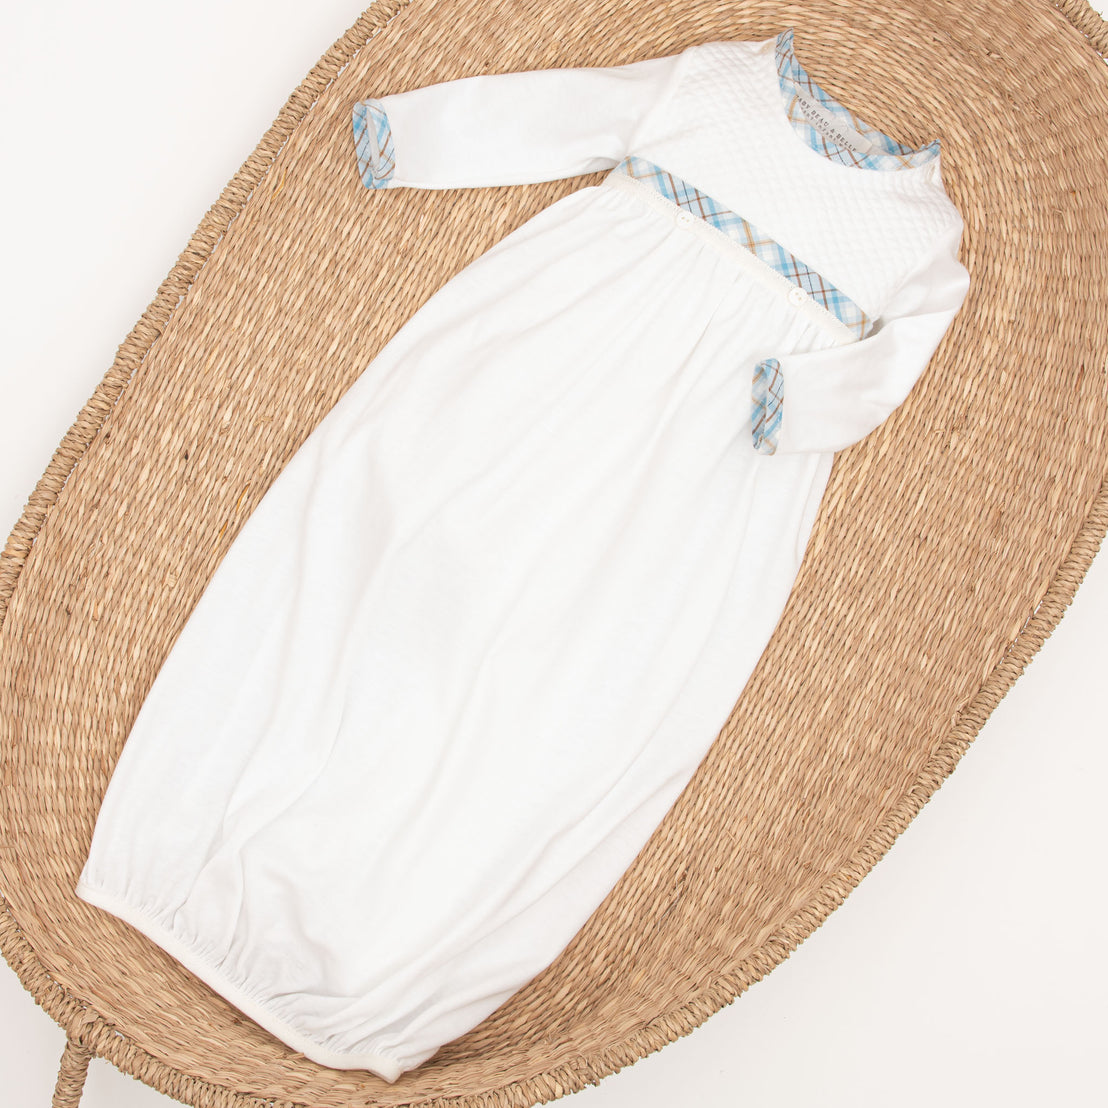 A white Mason Newborn Gown with blue trim laid neatly inside a woven, oval-shaped basket on a plain background.